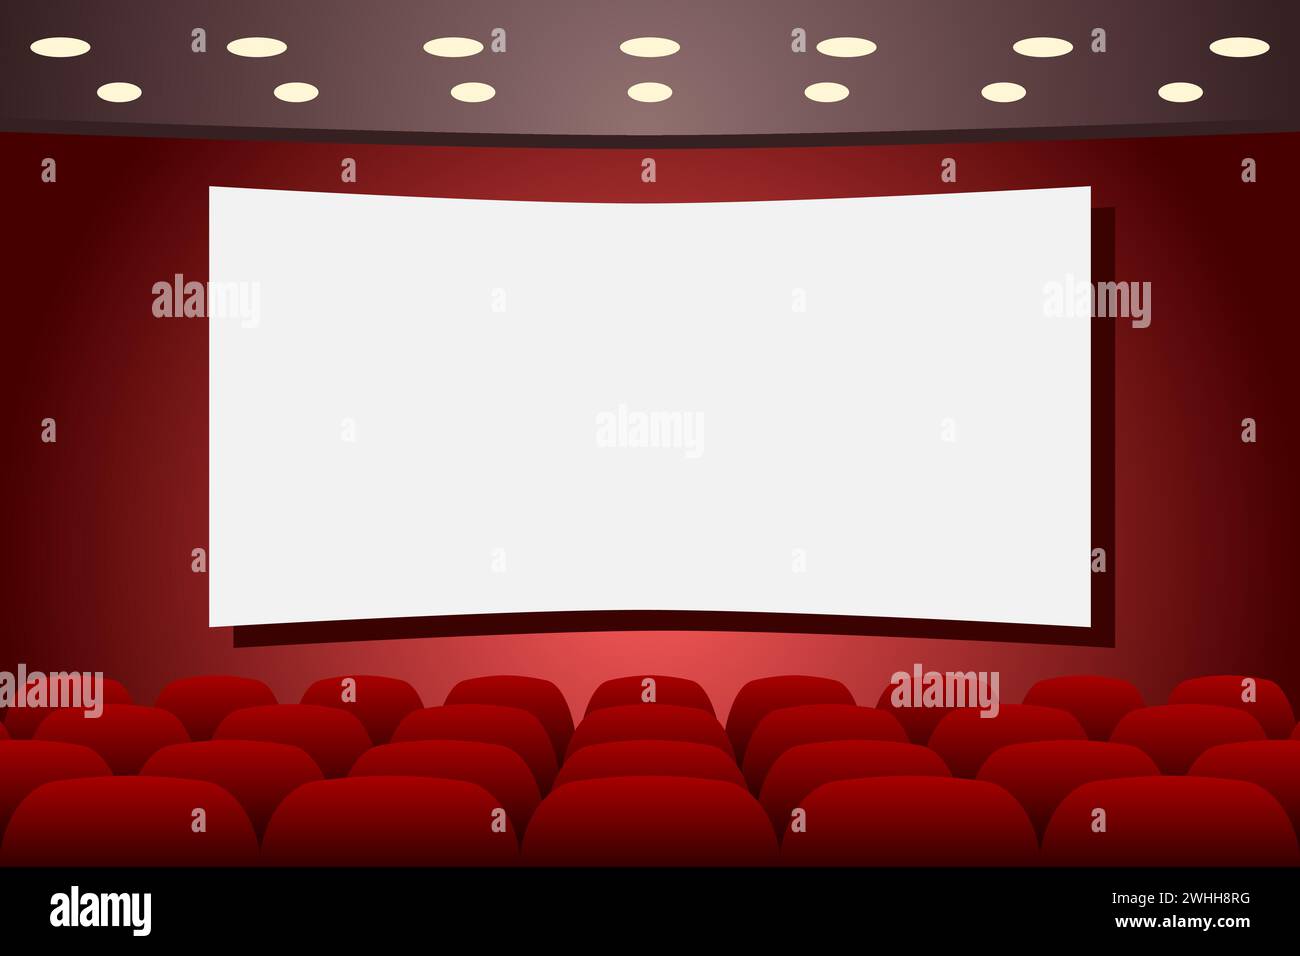 Theater stage with empty seats rows and blank screen. Theatre interior.  Copy space. Vector illustration. Stock Vector